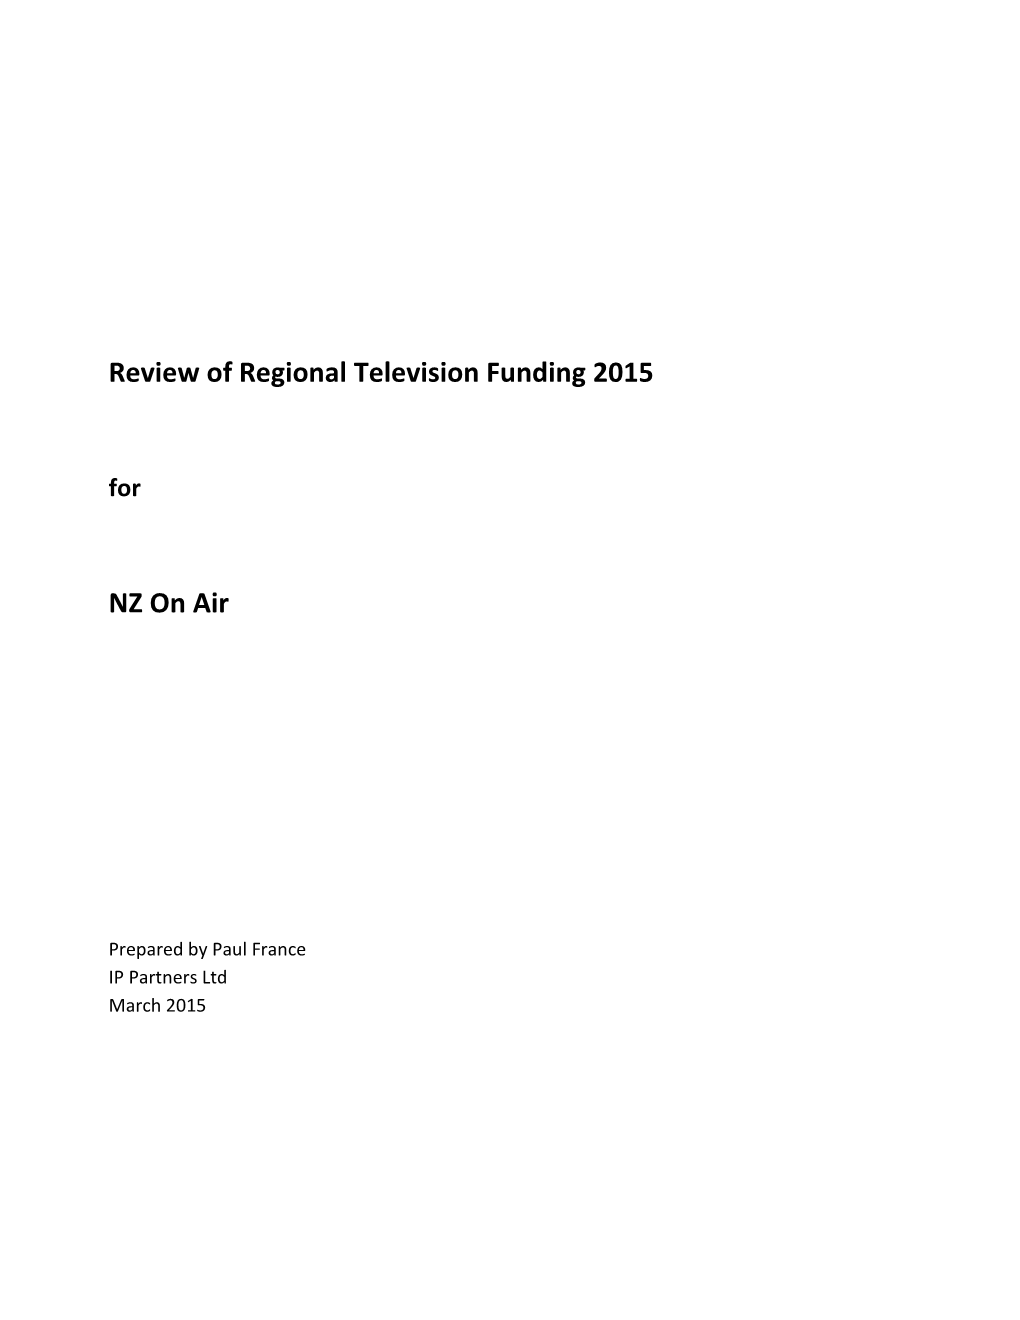 Review of Regional Television Funding 2015 NZ On